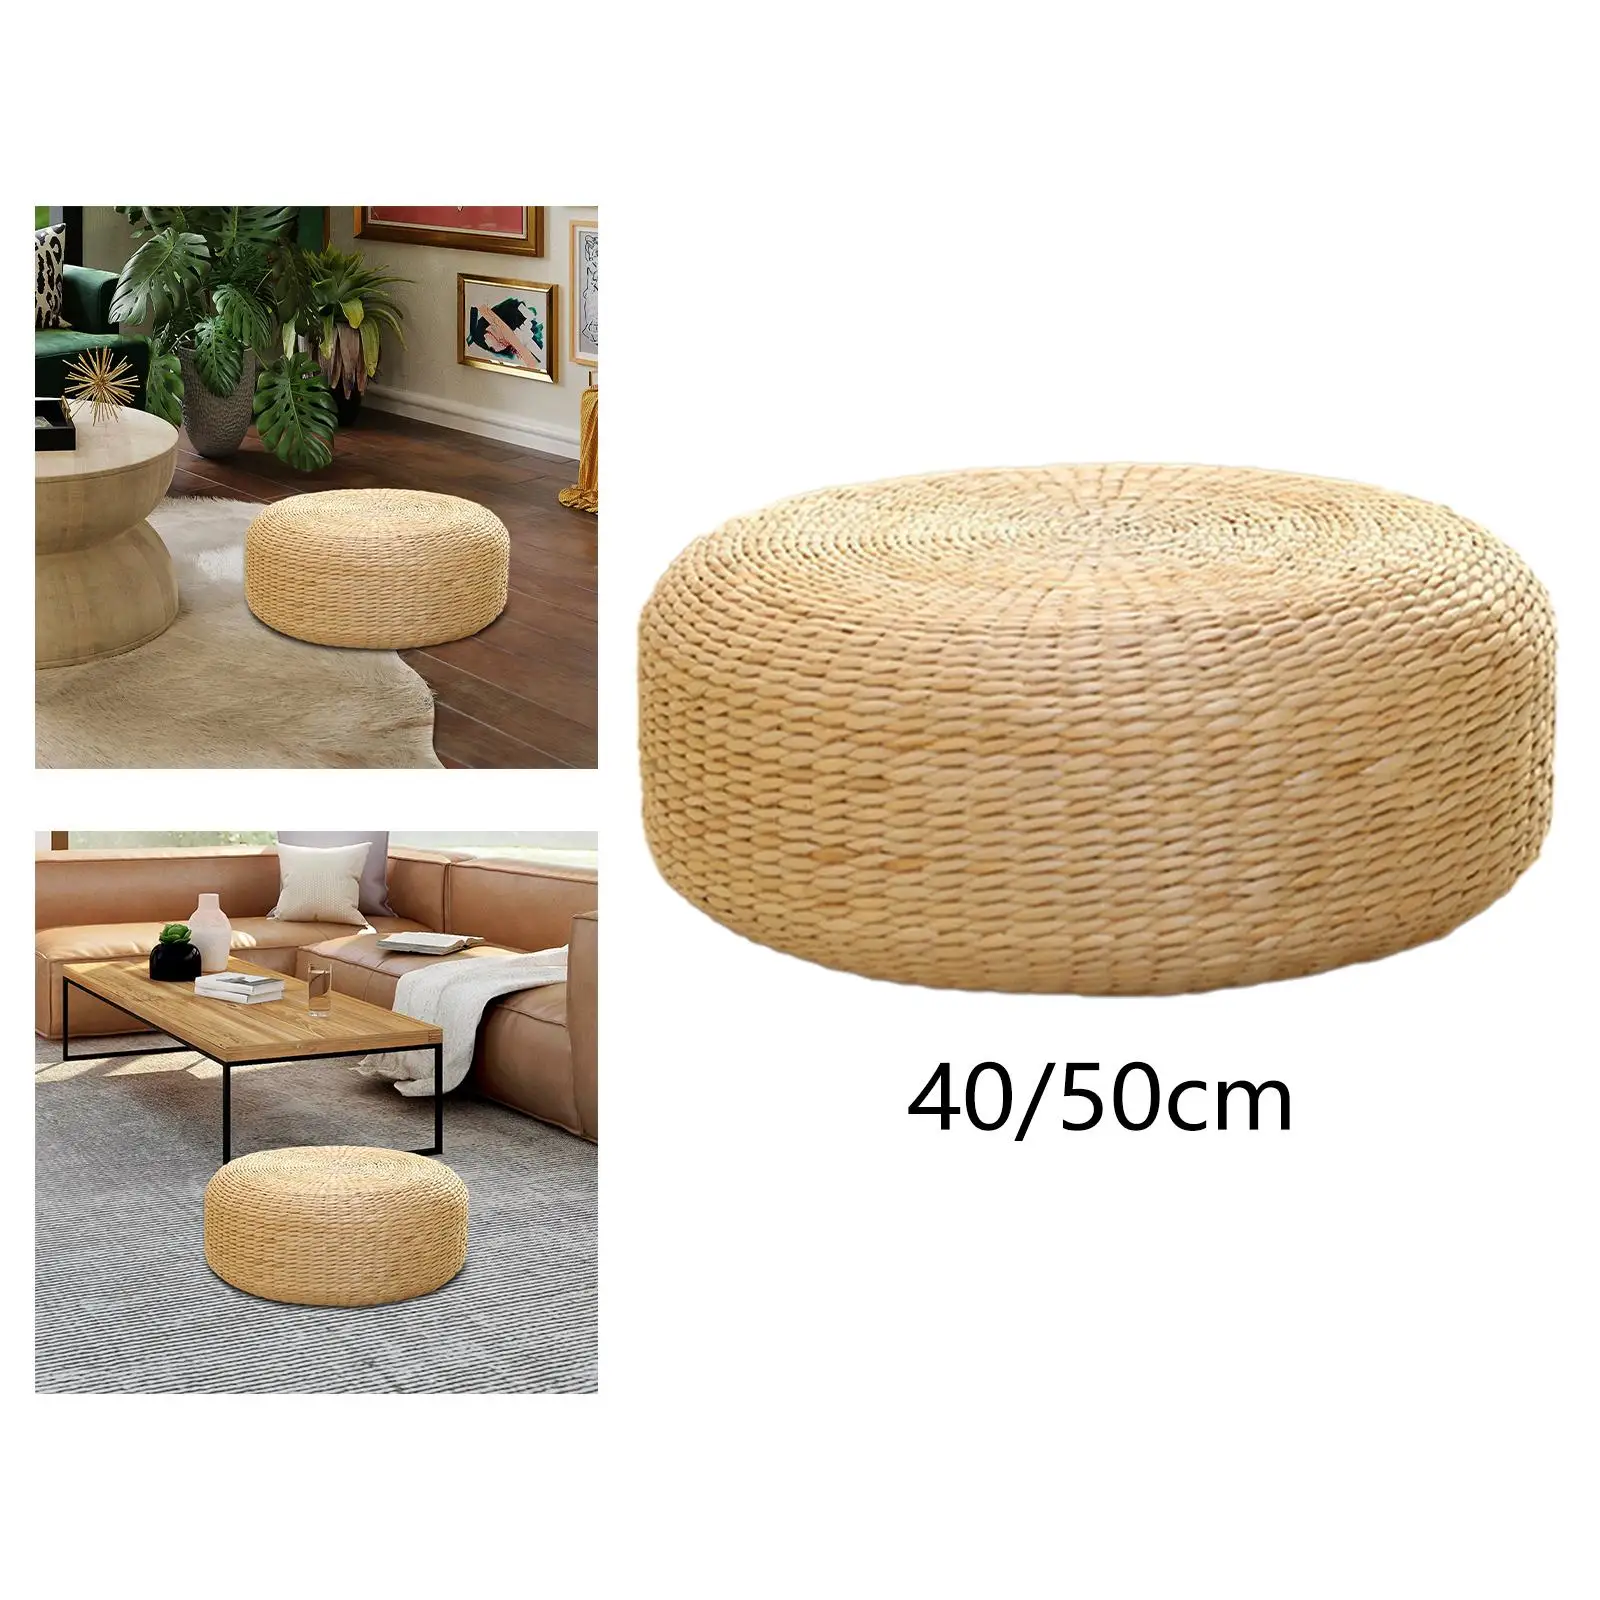 Woven Futon Seat Cushion Handcrafted Thicken Reading Yoga Rustic Japanese Style Seating Cushion for Floor Balcony Office Indoor